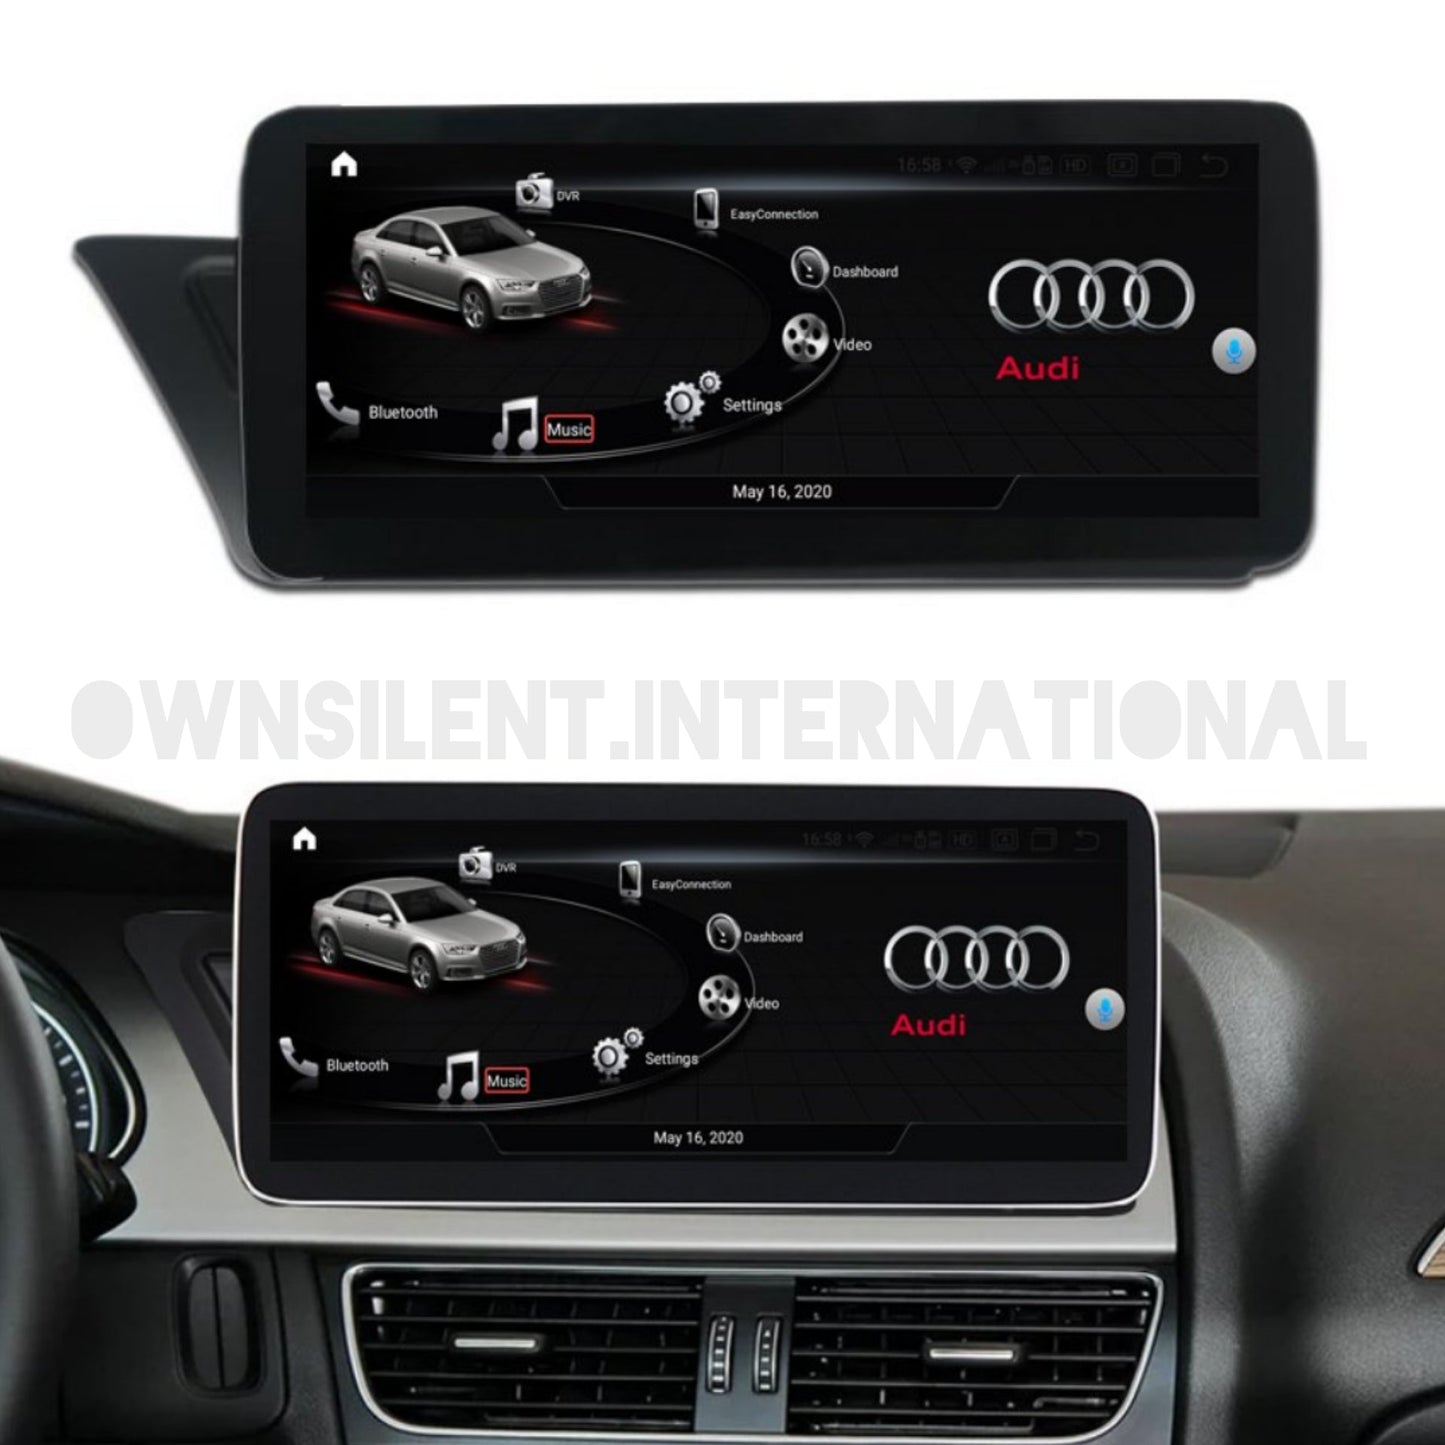 AUDI A4/A5/S5 (2009-2017) 10.25"/12.3" ANDROID MULTIMEDIA SYSTEM (B8)
Carplay Blu-ray DSP 1280